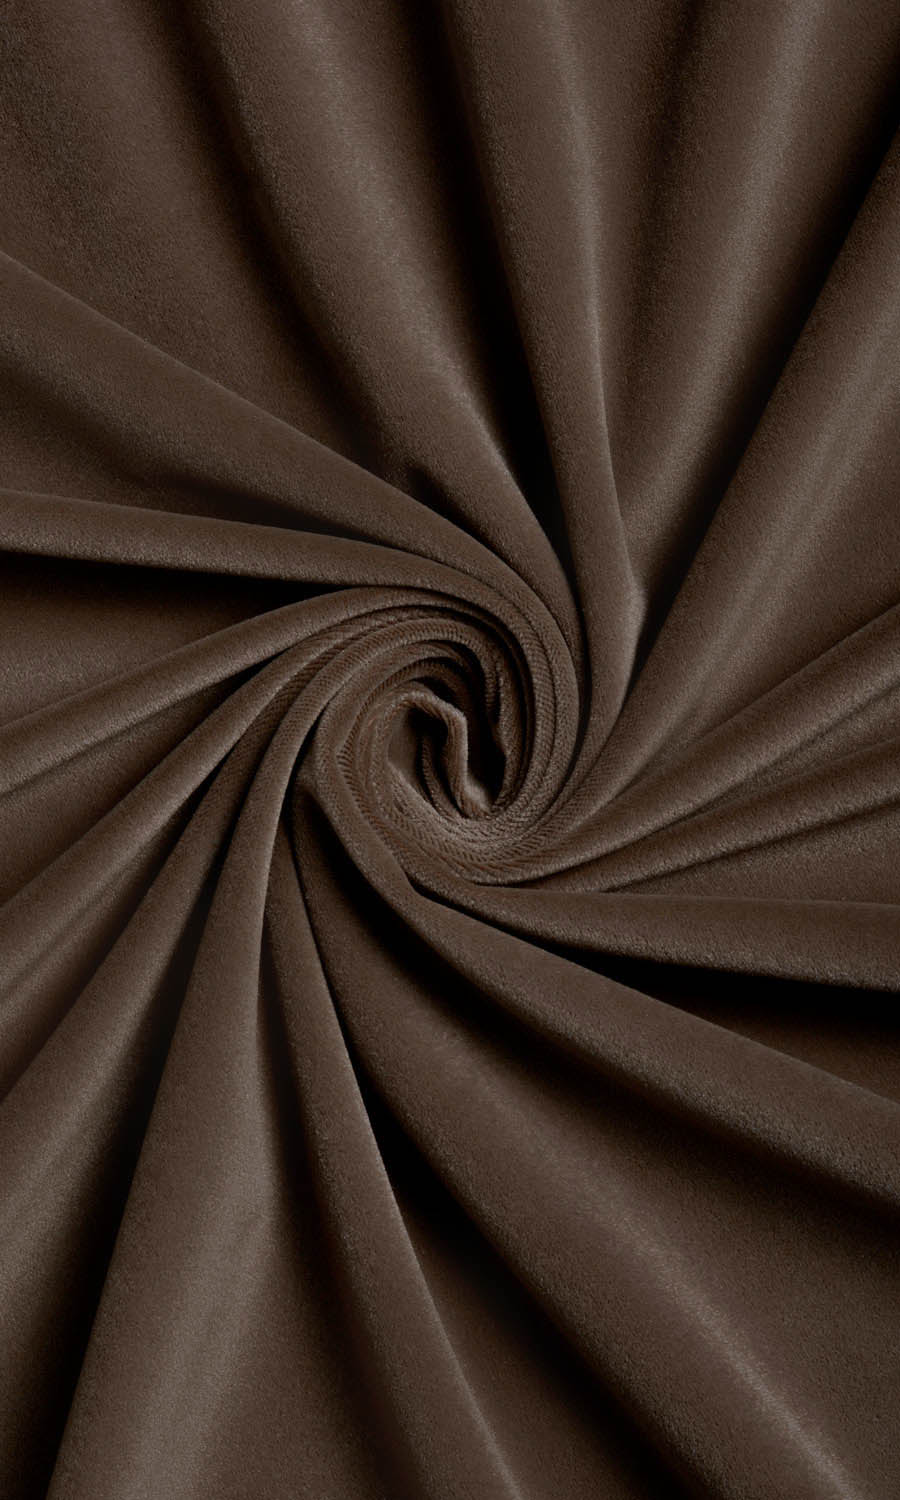 Nut Brown' Fabric by the Yard (Coffee Brown)